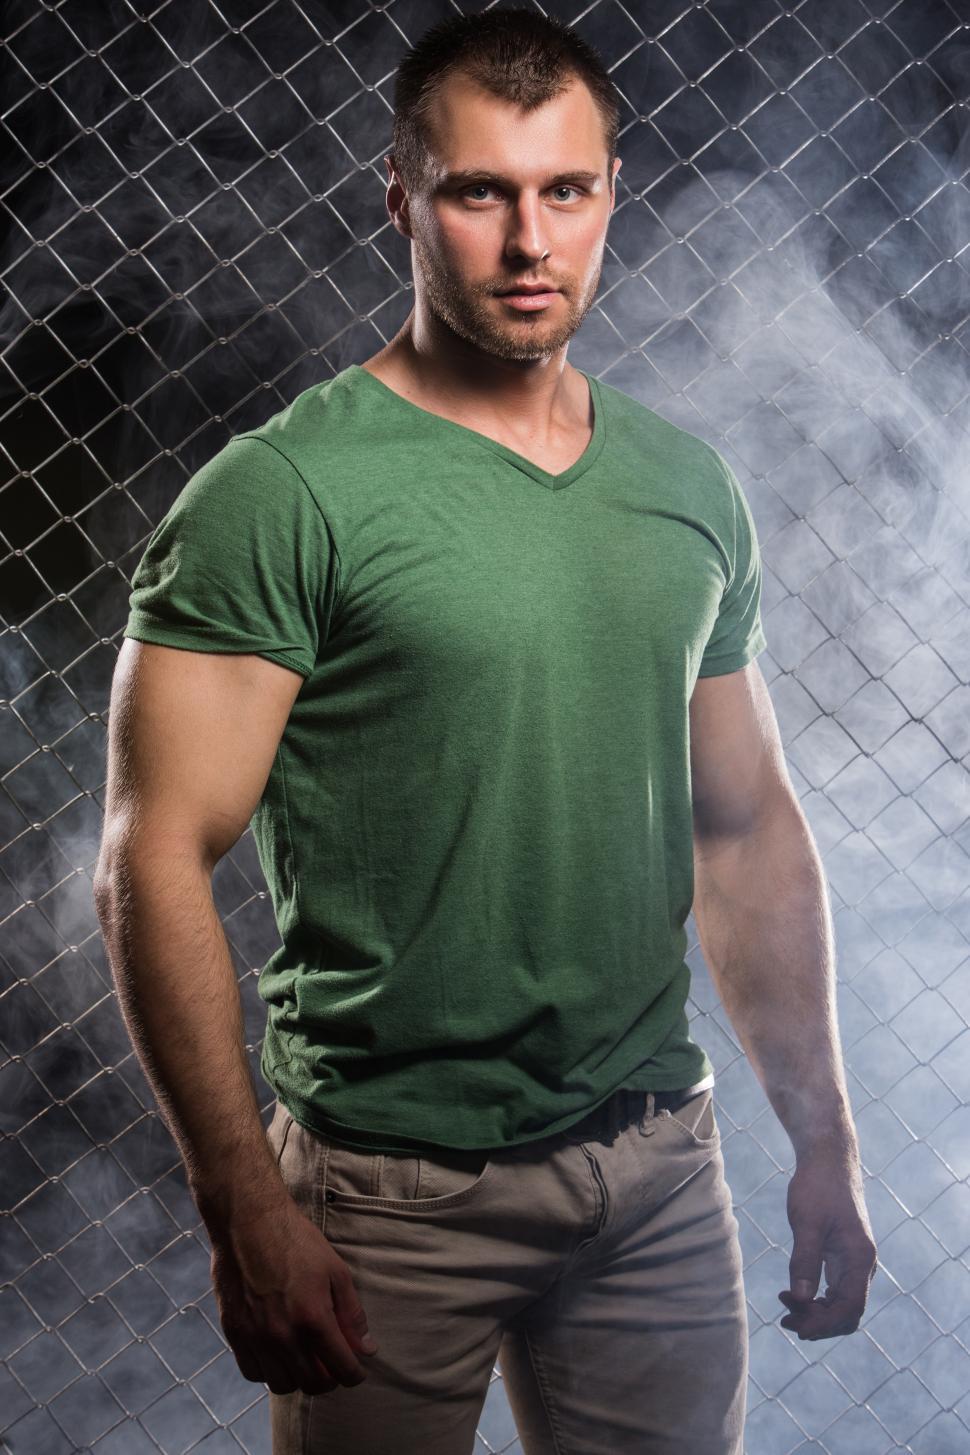 Free Image of Fitness. Beautiful, strong man in clothes on fence background 